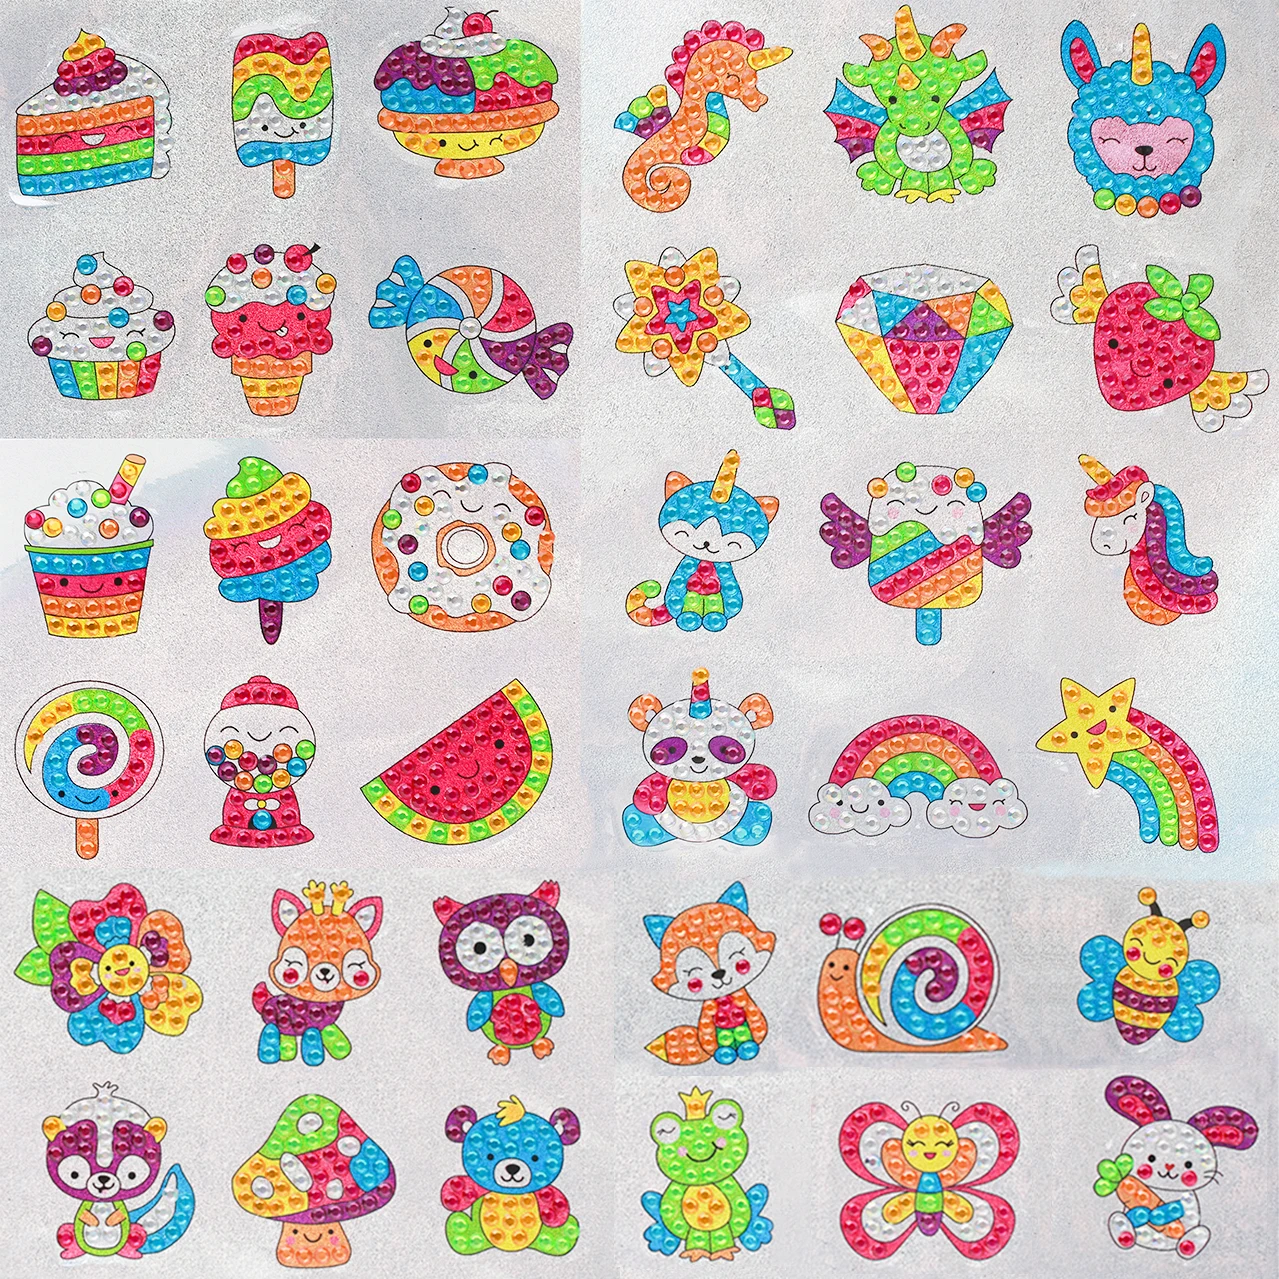 

DIY Diamond Painting 5D Stickers Children Christmas gift Cartoon Art Set Beginners Mosaic Stickers by Numbers Kits Crafts Sets